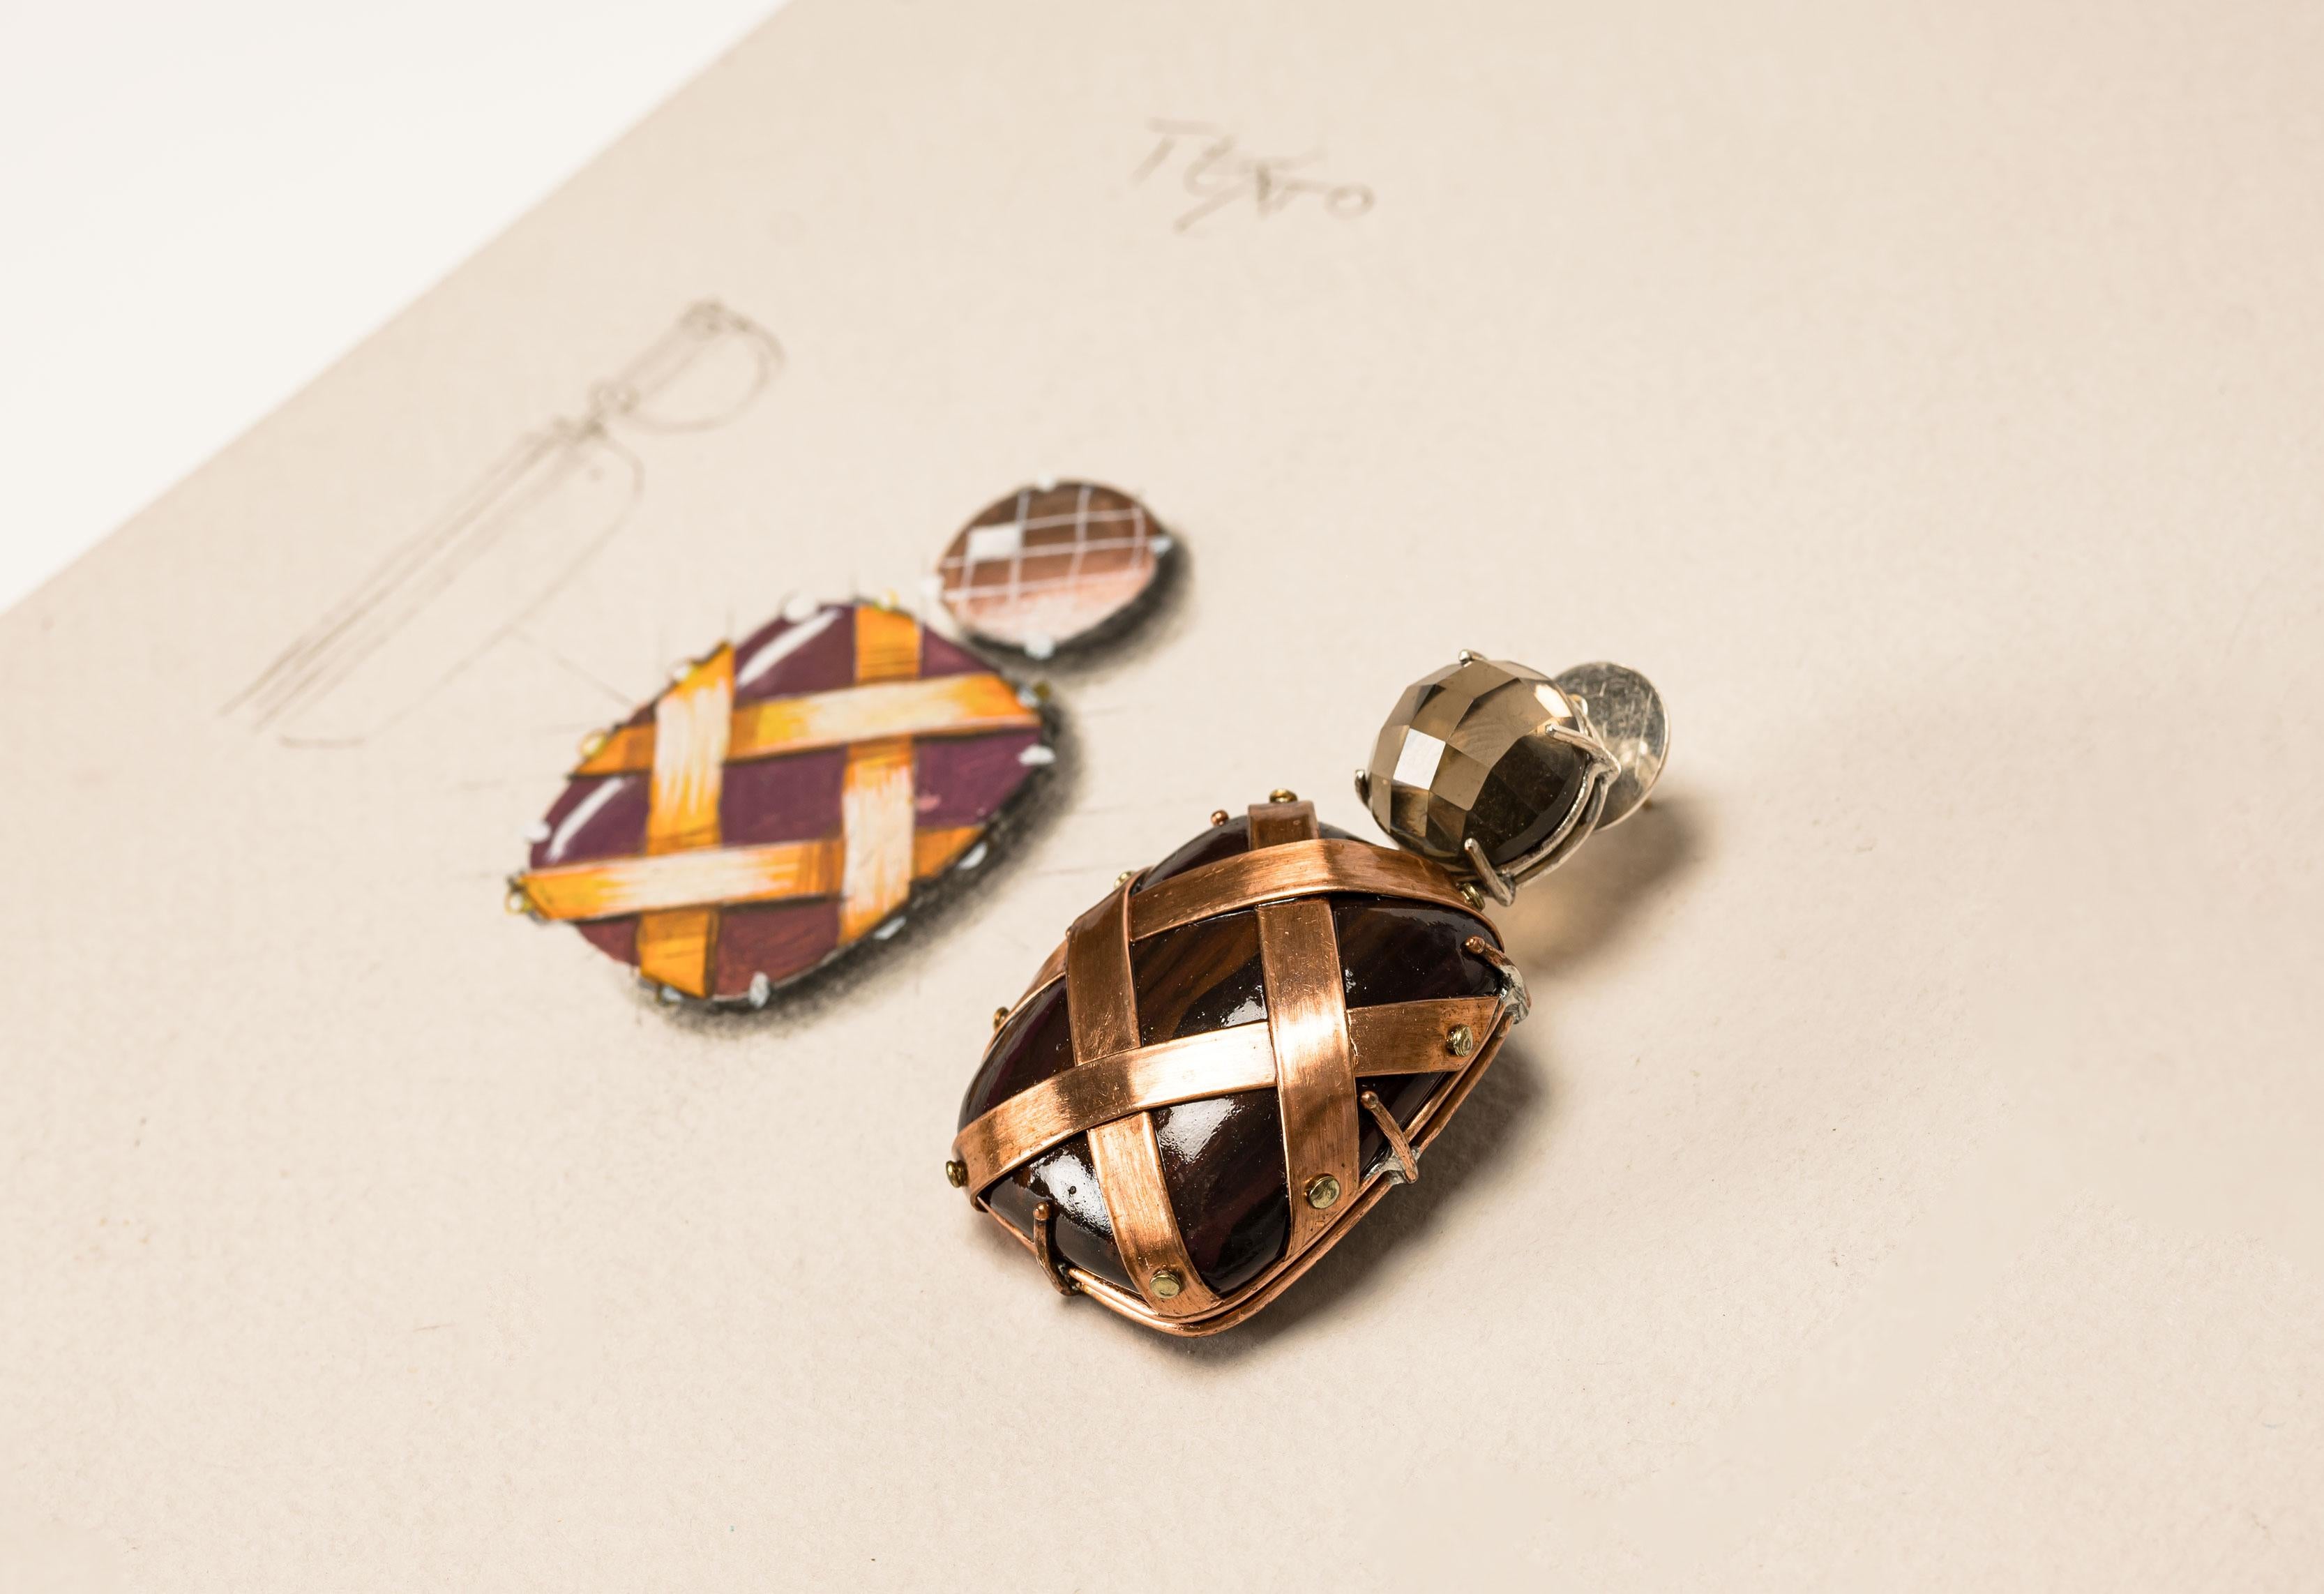 Bodyfurnitures Earrings, Smoky Quartz, Gold 18kt, Silver, Copper braided bands In New Condition For Sale In Bolzano, BZ